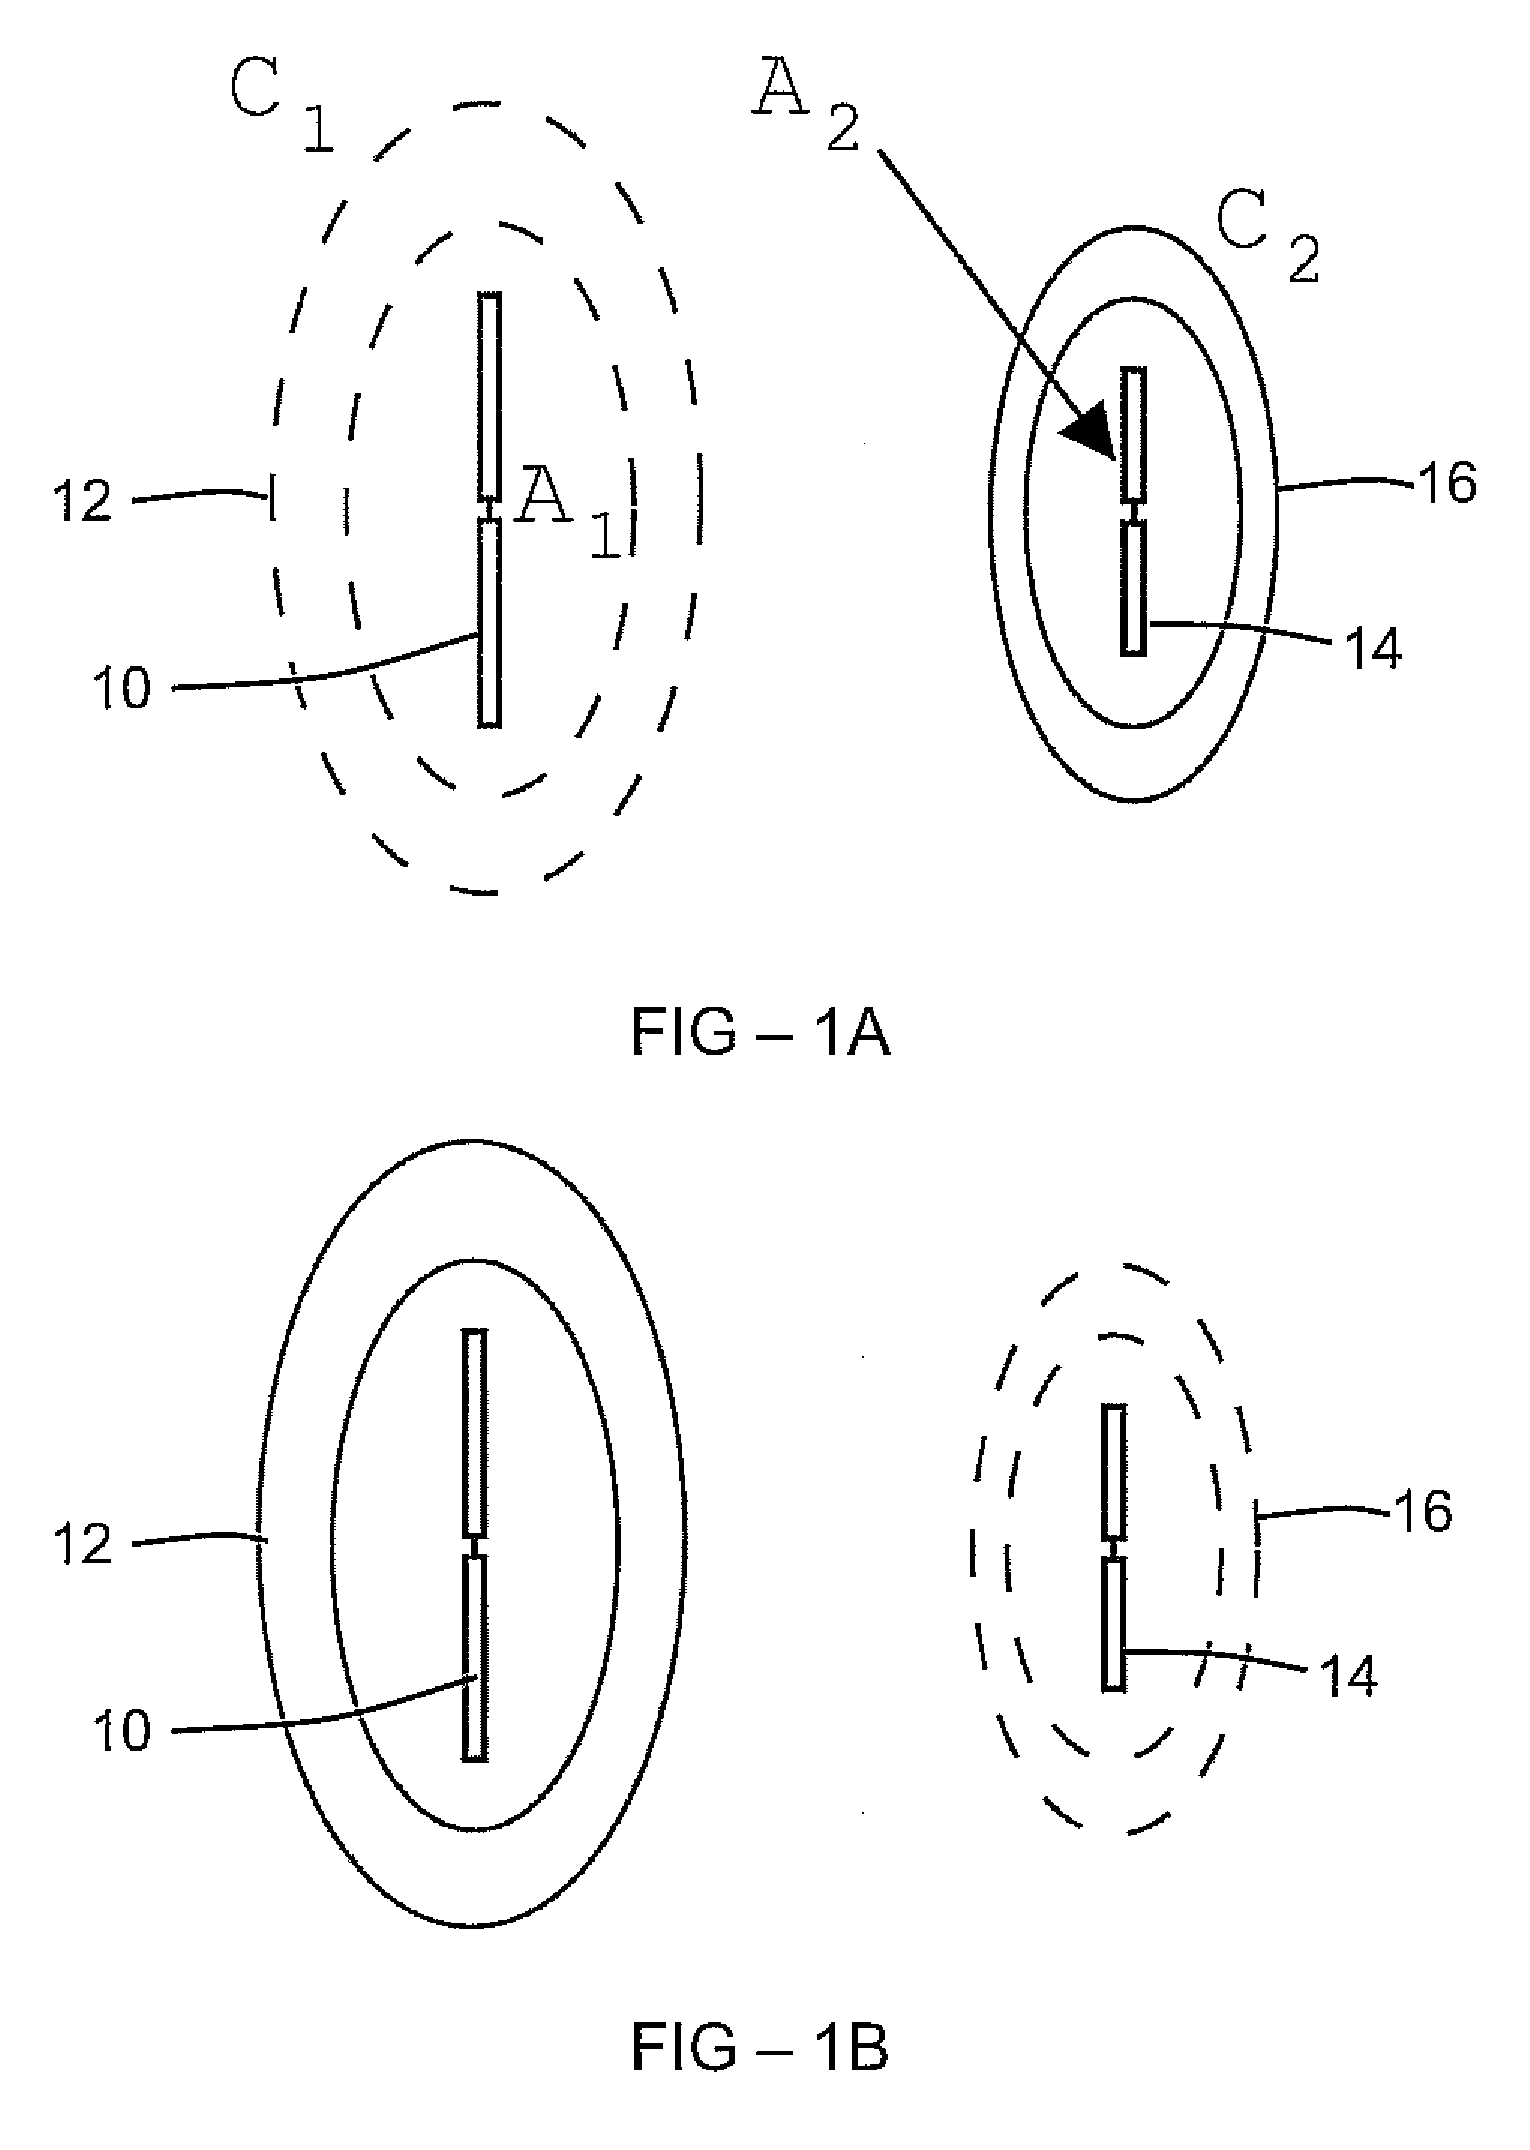 Method and apparatus for reduced coupling and interference between antennas